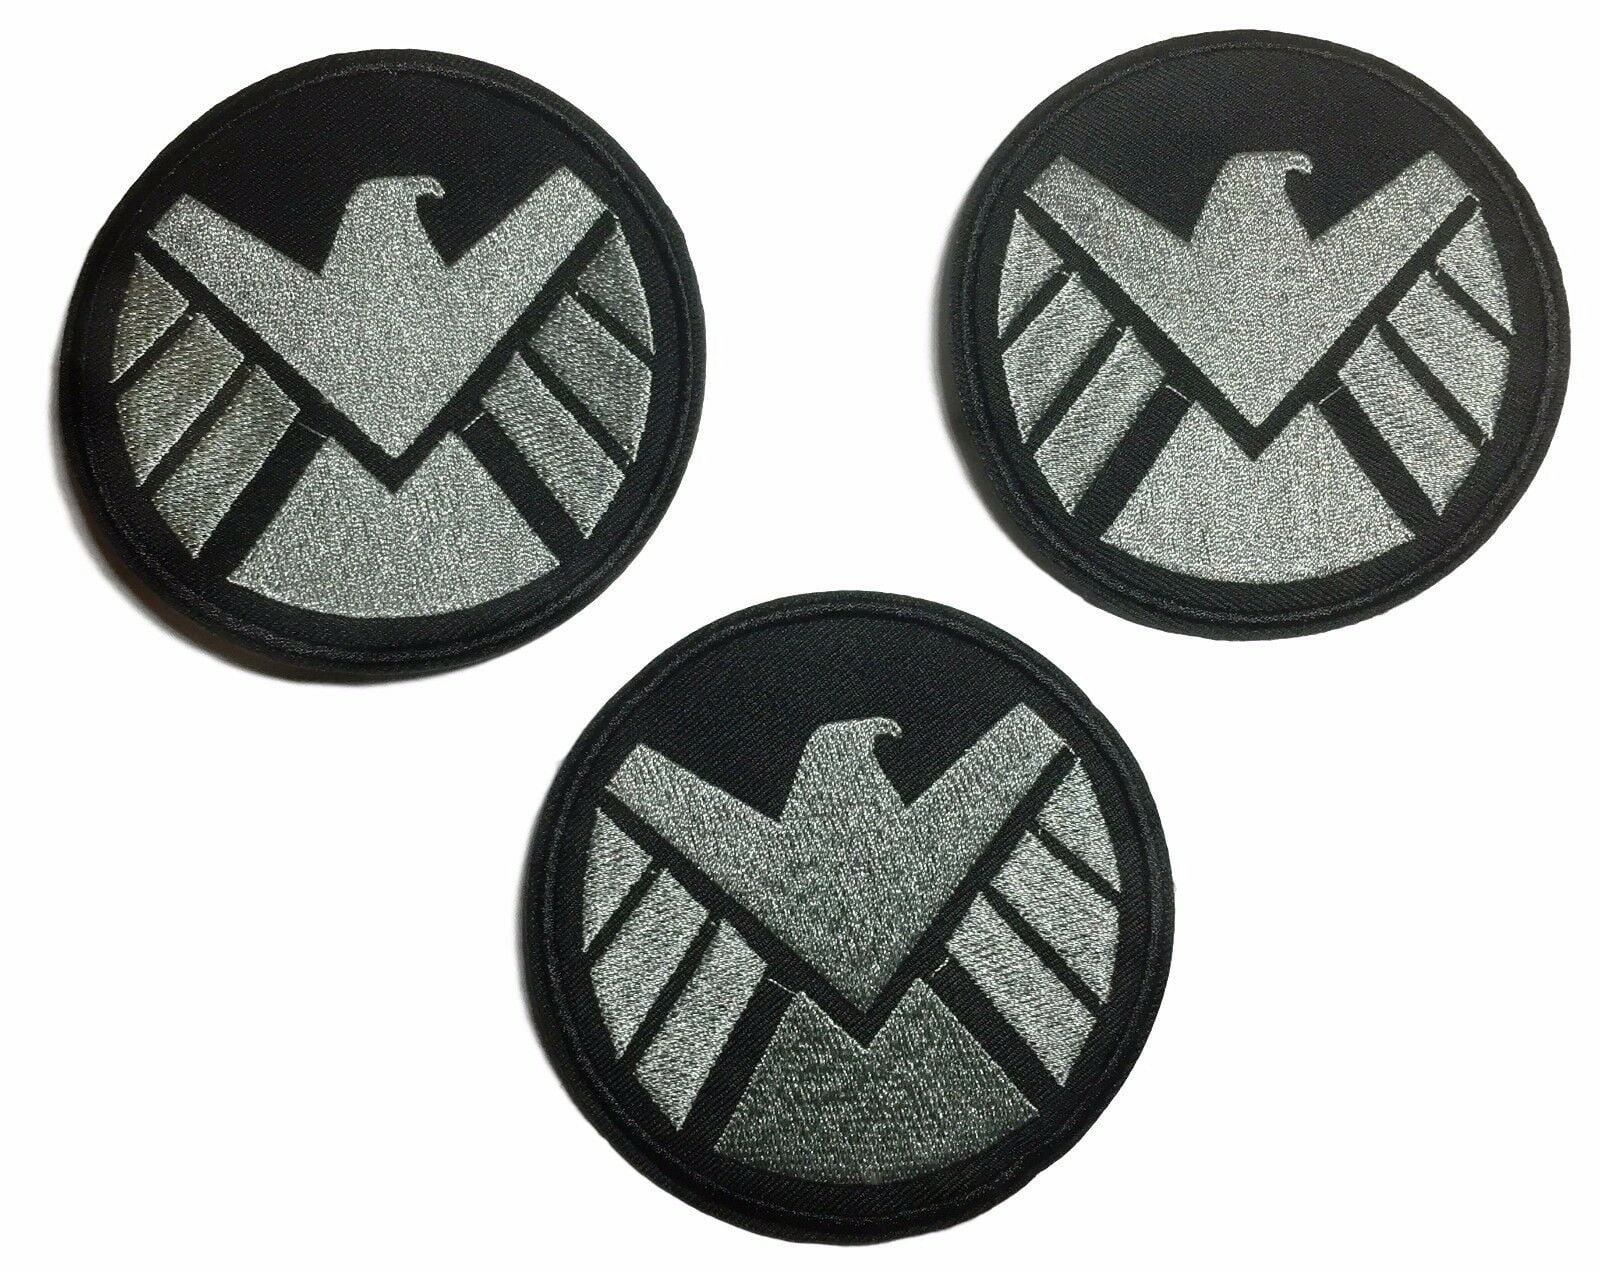 Swords and Shield Patrol Patch 2 Round Embroidered Patch 